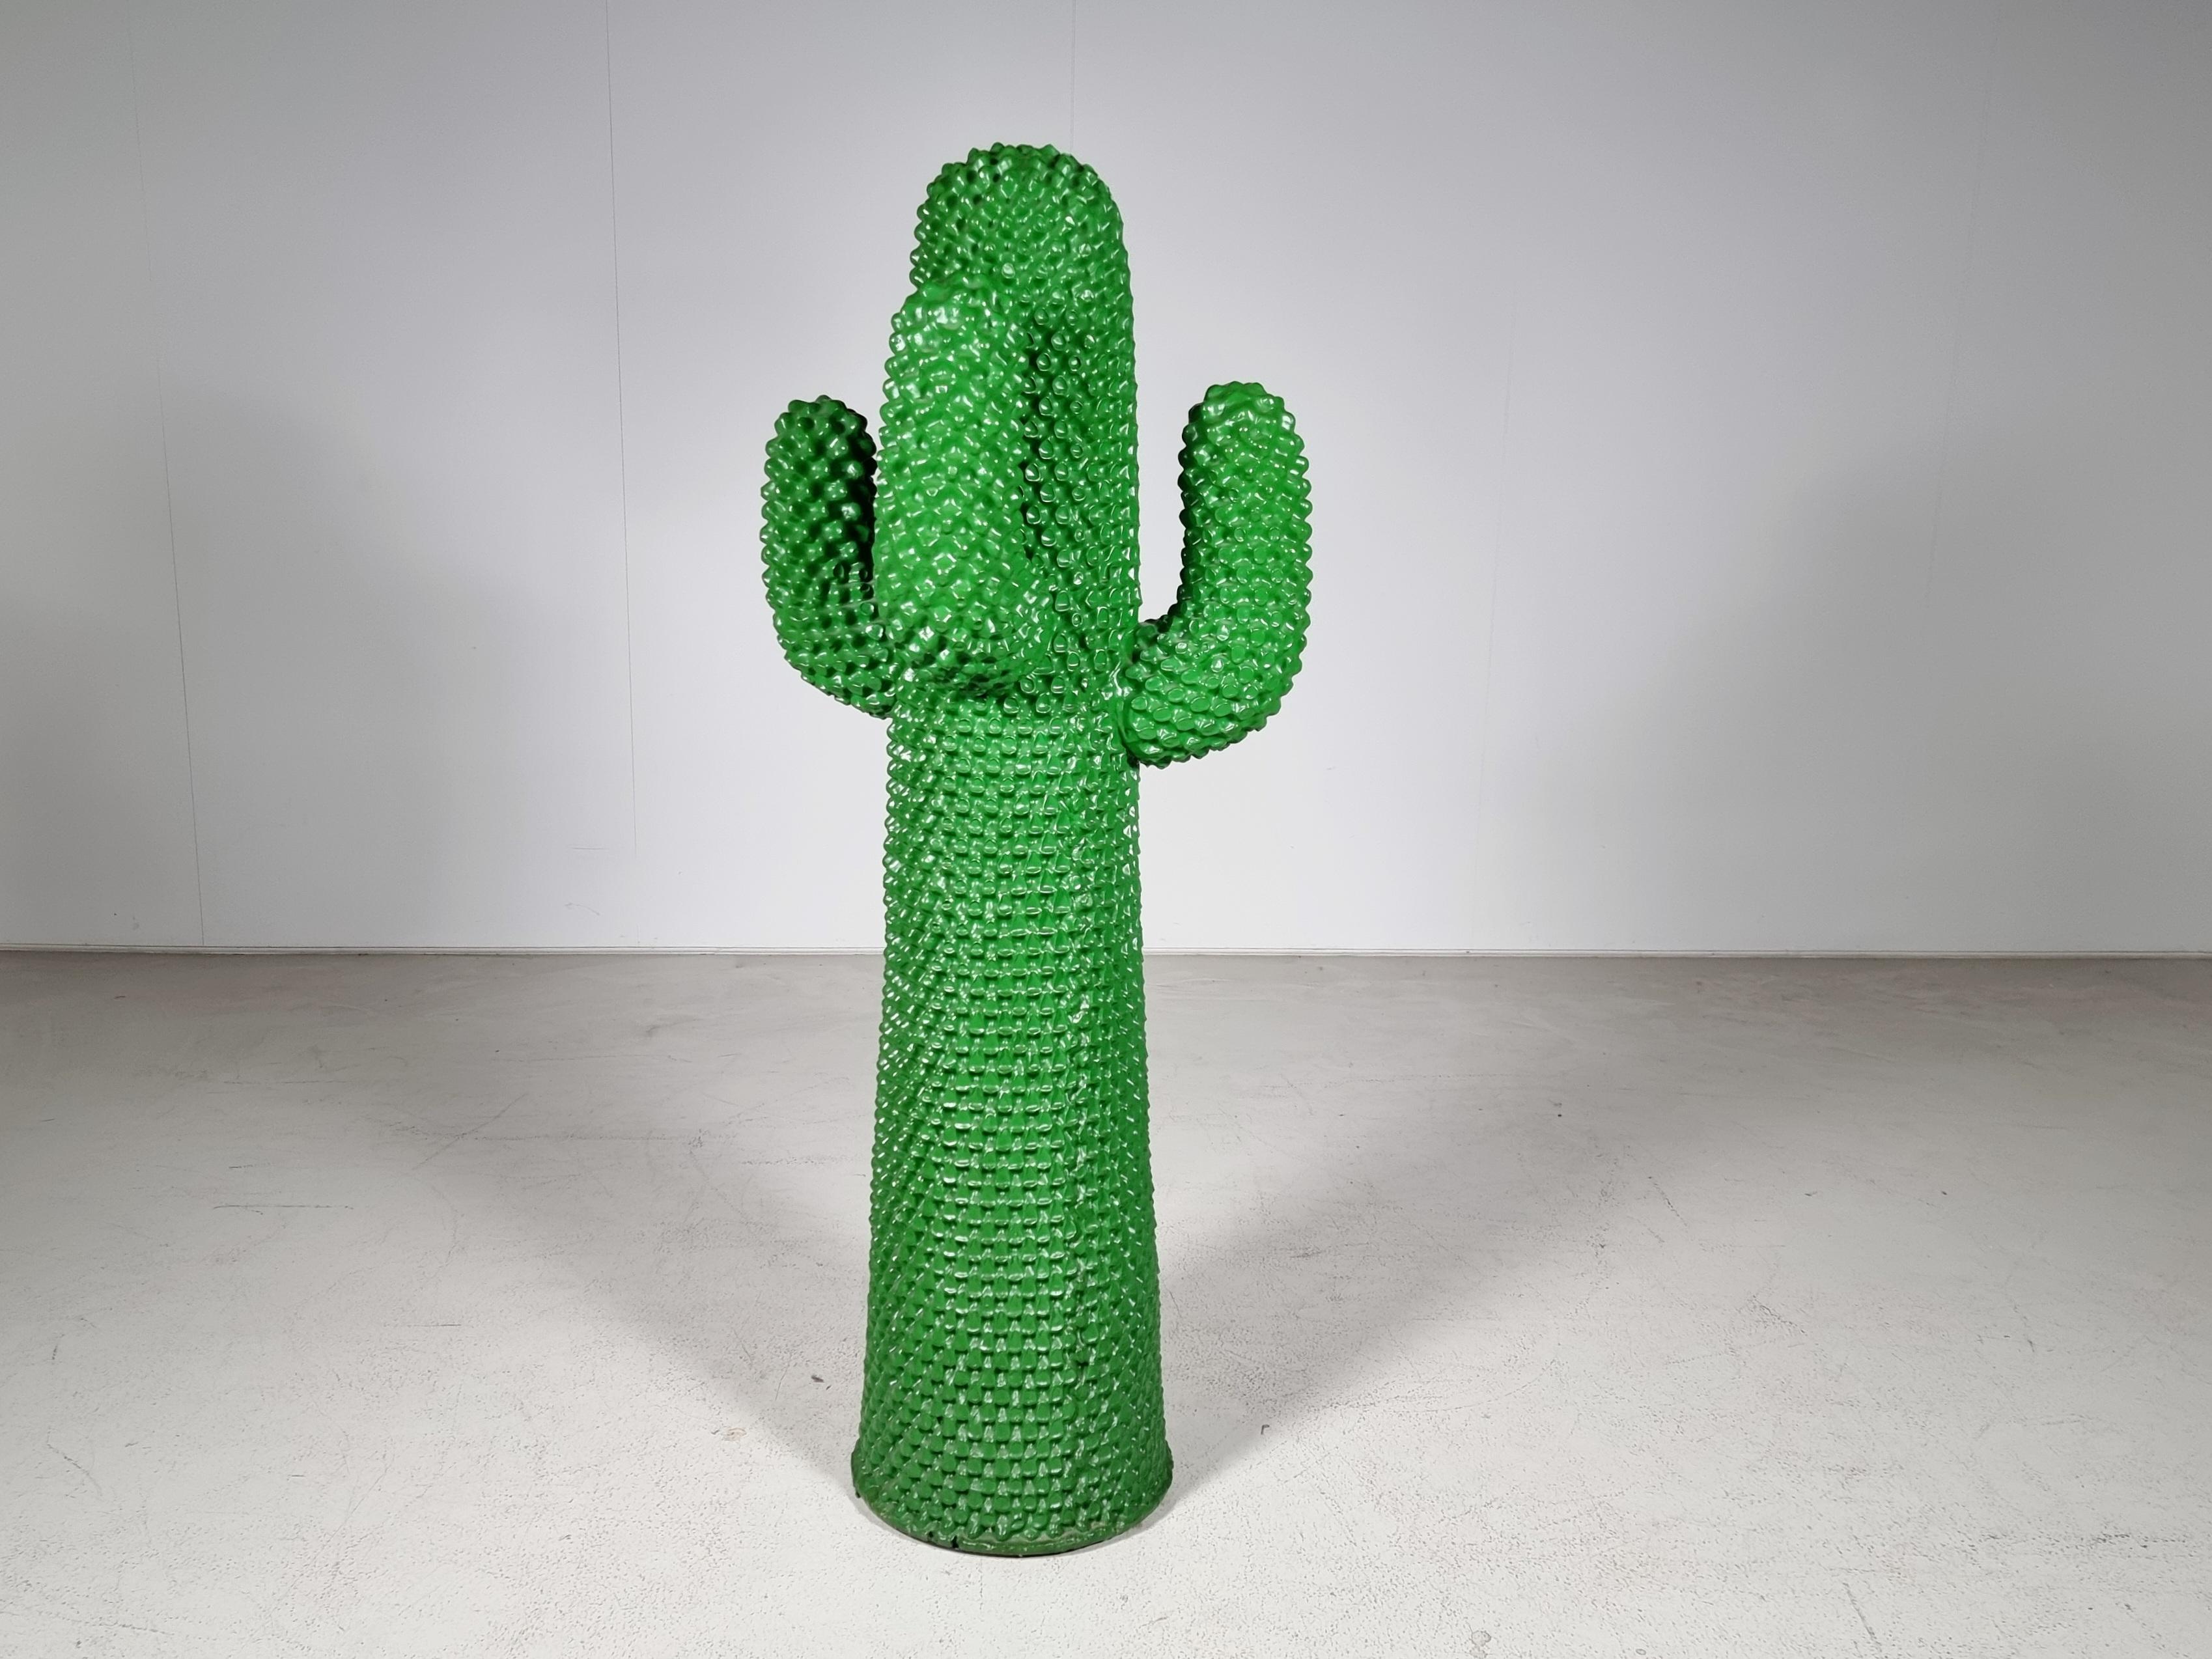 Iconic cactus coat rack in very good original condition. Signed #964/2000 Gufram Multiples '86. The Gufram Cactus is included in several museum collections around the world and documented in several publications on decorative arts from the 20th